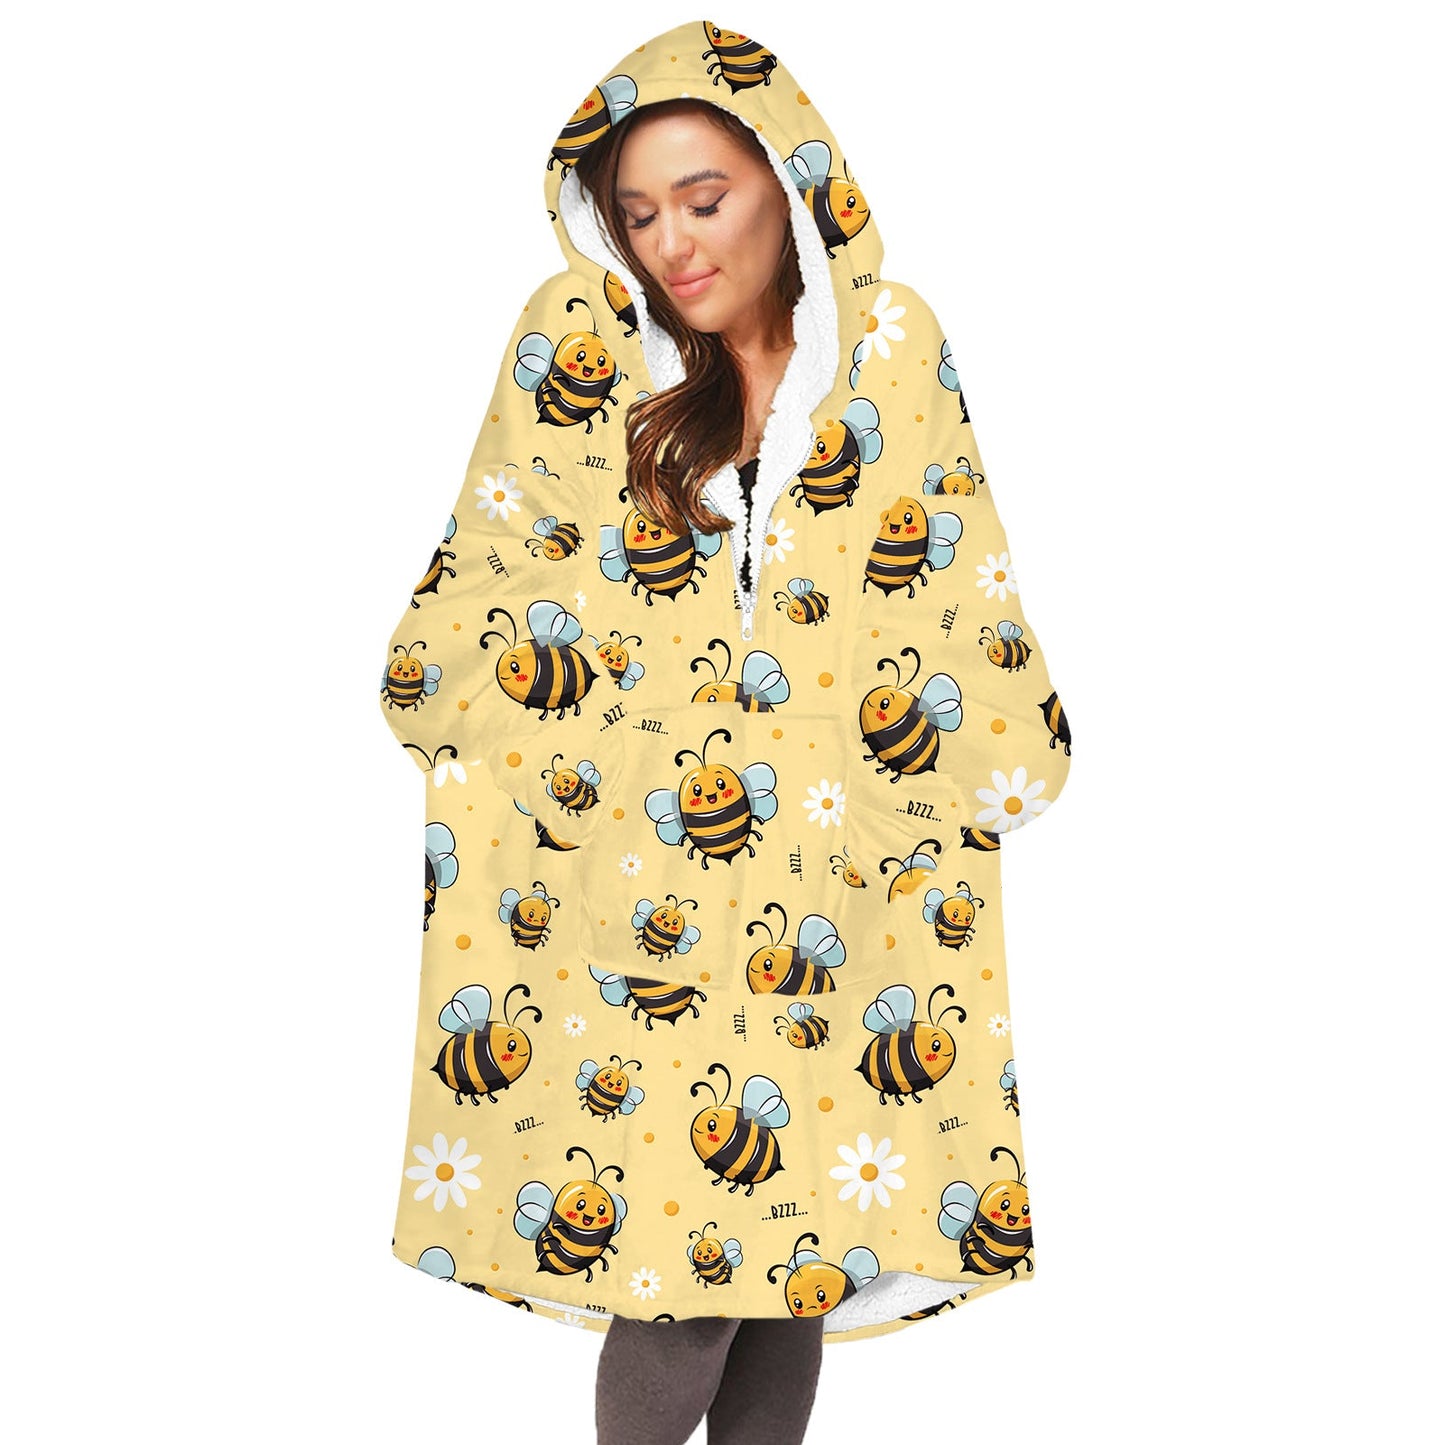 Soft Bee Print Lazy Wearable Watching TV Blanket-Blankets-BWQM-TWQM013-Adult-One Size-Free Shipping Leatheretro